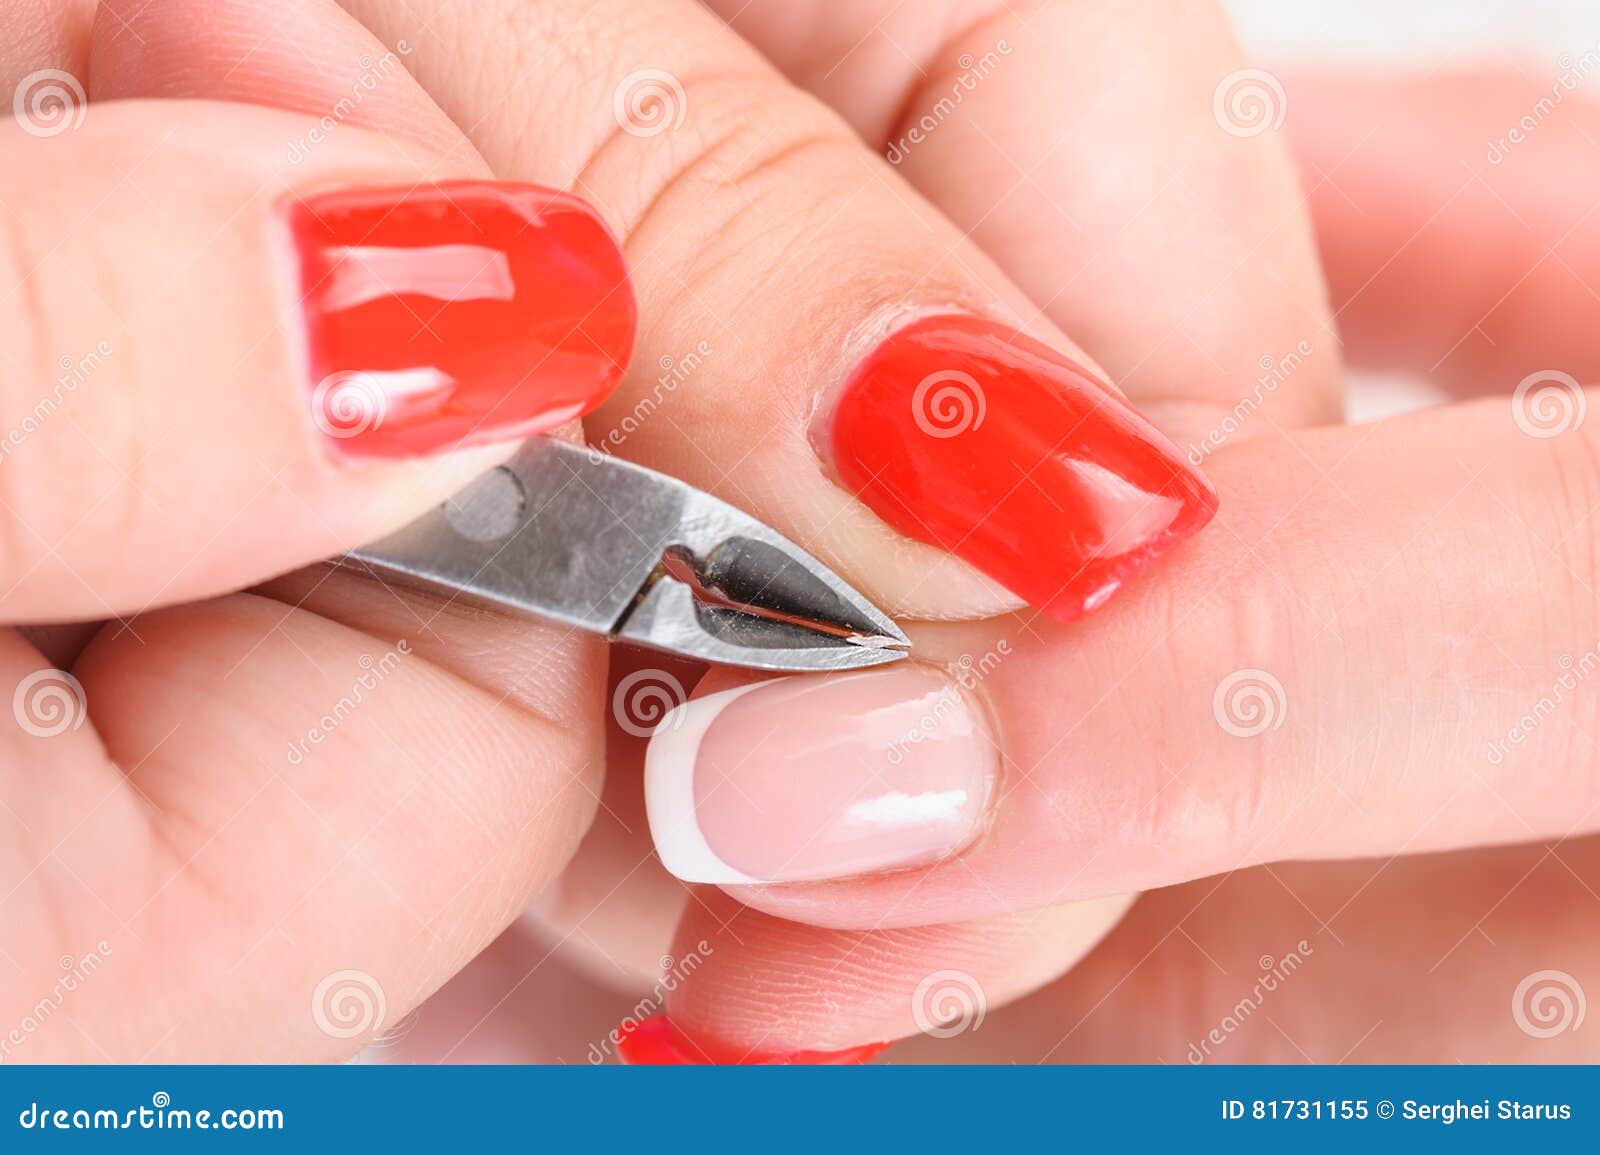 cuticles cutting with nail clippers